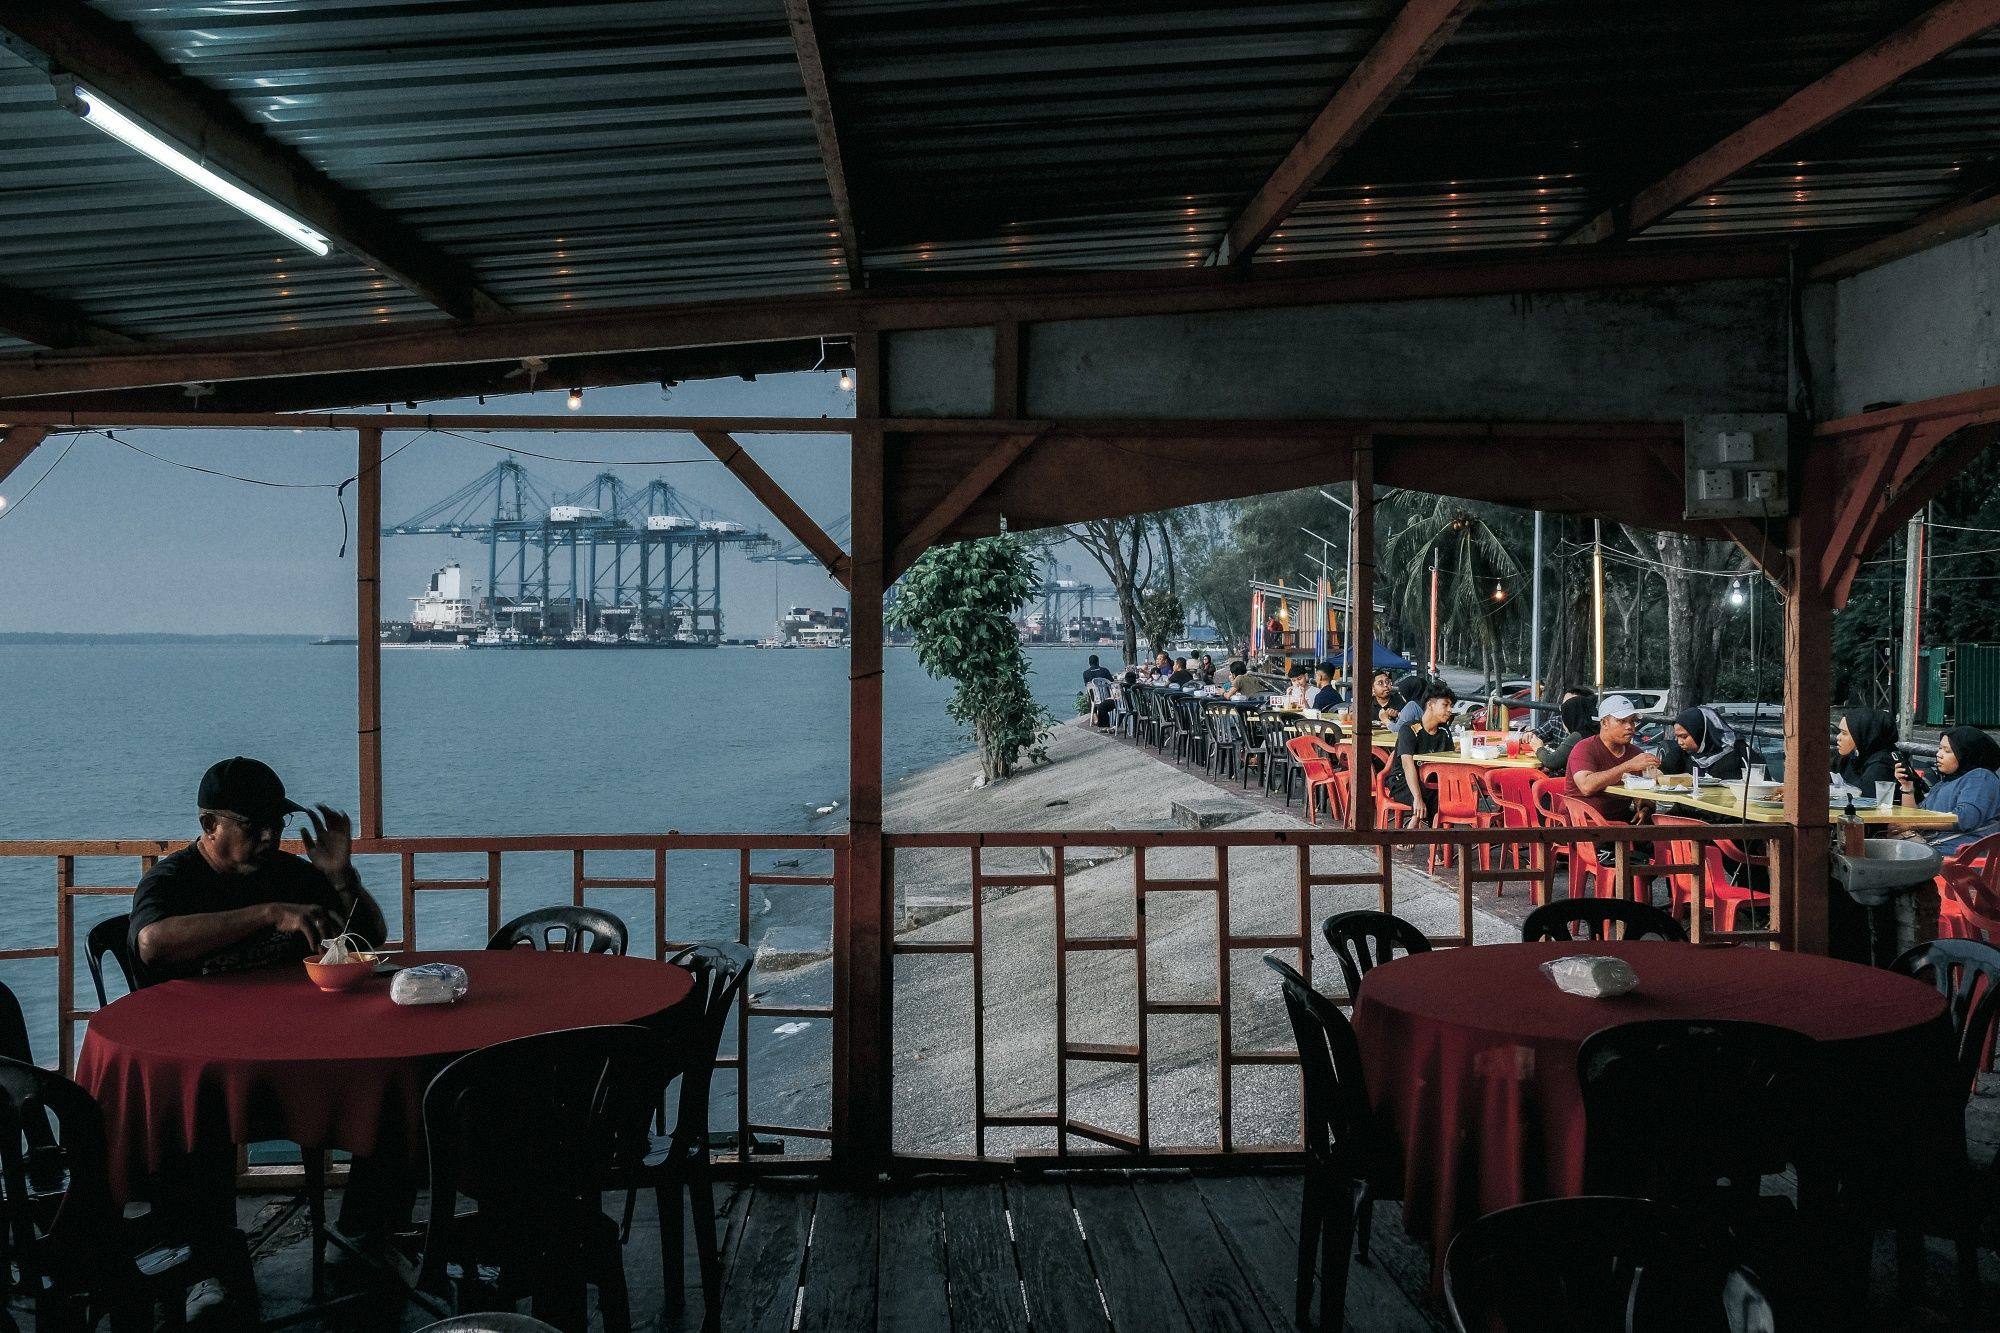 Customers sit in a restaurant with gantry cranes in the background at Port Klang, Selangor, Malaysia, on August 12. As countries reopen, intraregional trade in Asia could help offset the effects of economic slowdowns elsewhere. Photo: Bloomberg